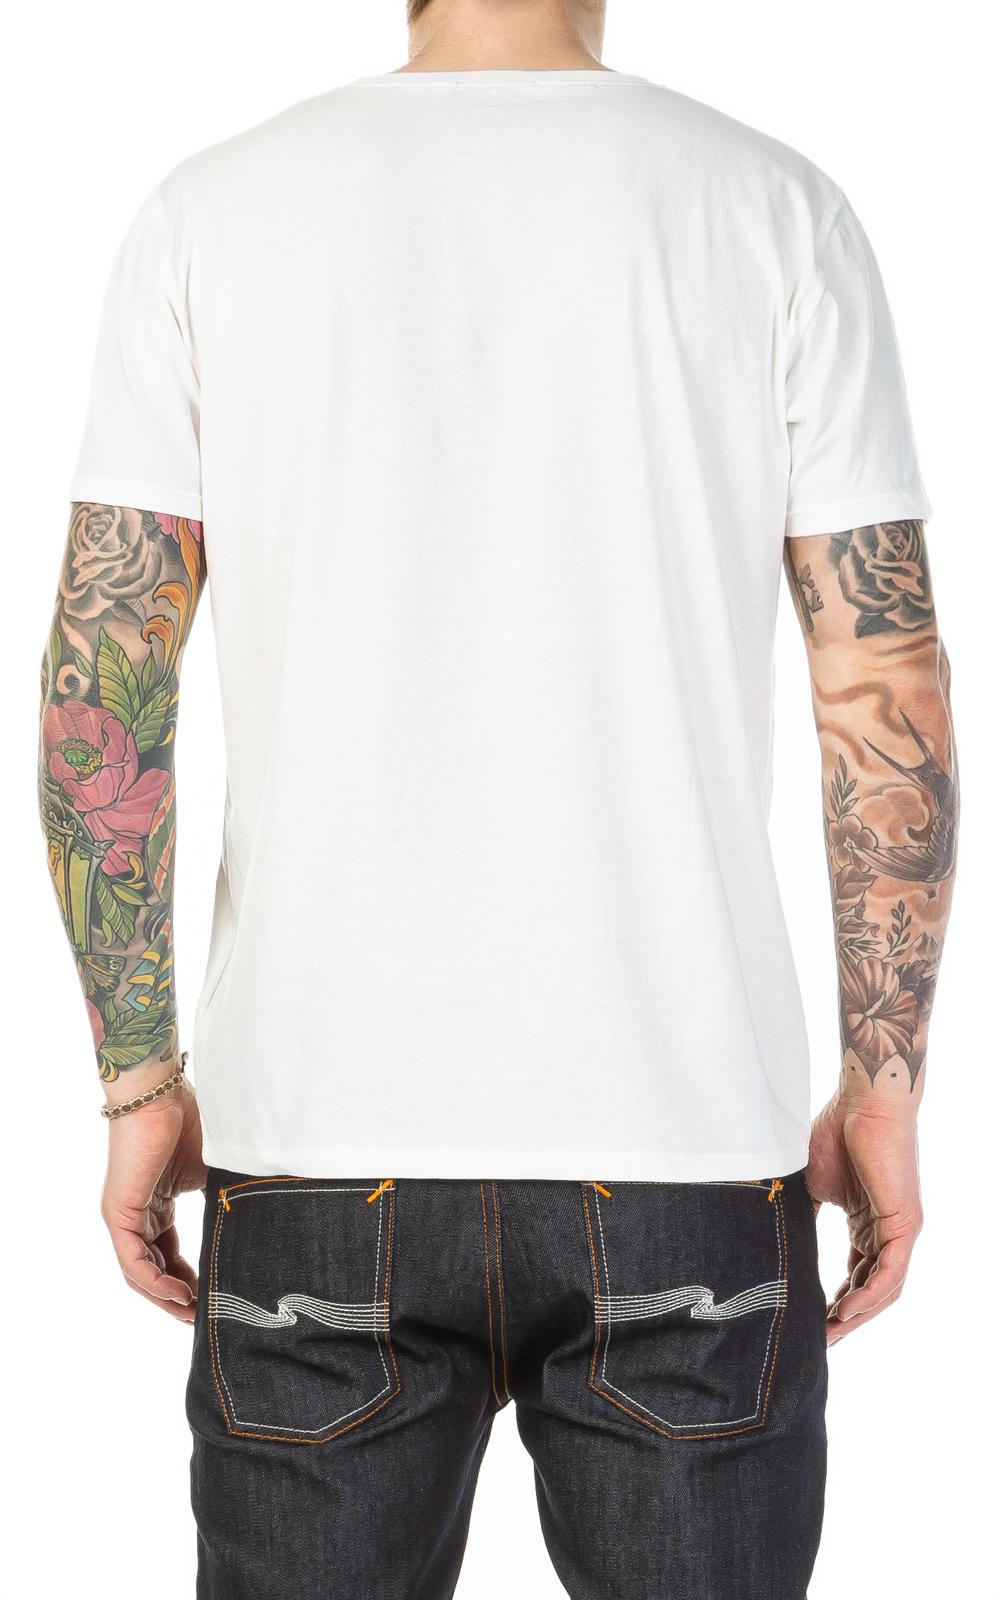 White Nudie Jeans Co Anders Facts Not Stories T-Shirt Nudie Jeans Men's T- Shirts Fashion suneducationgroup.com